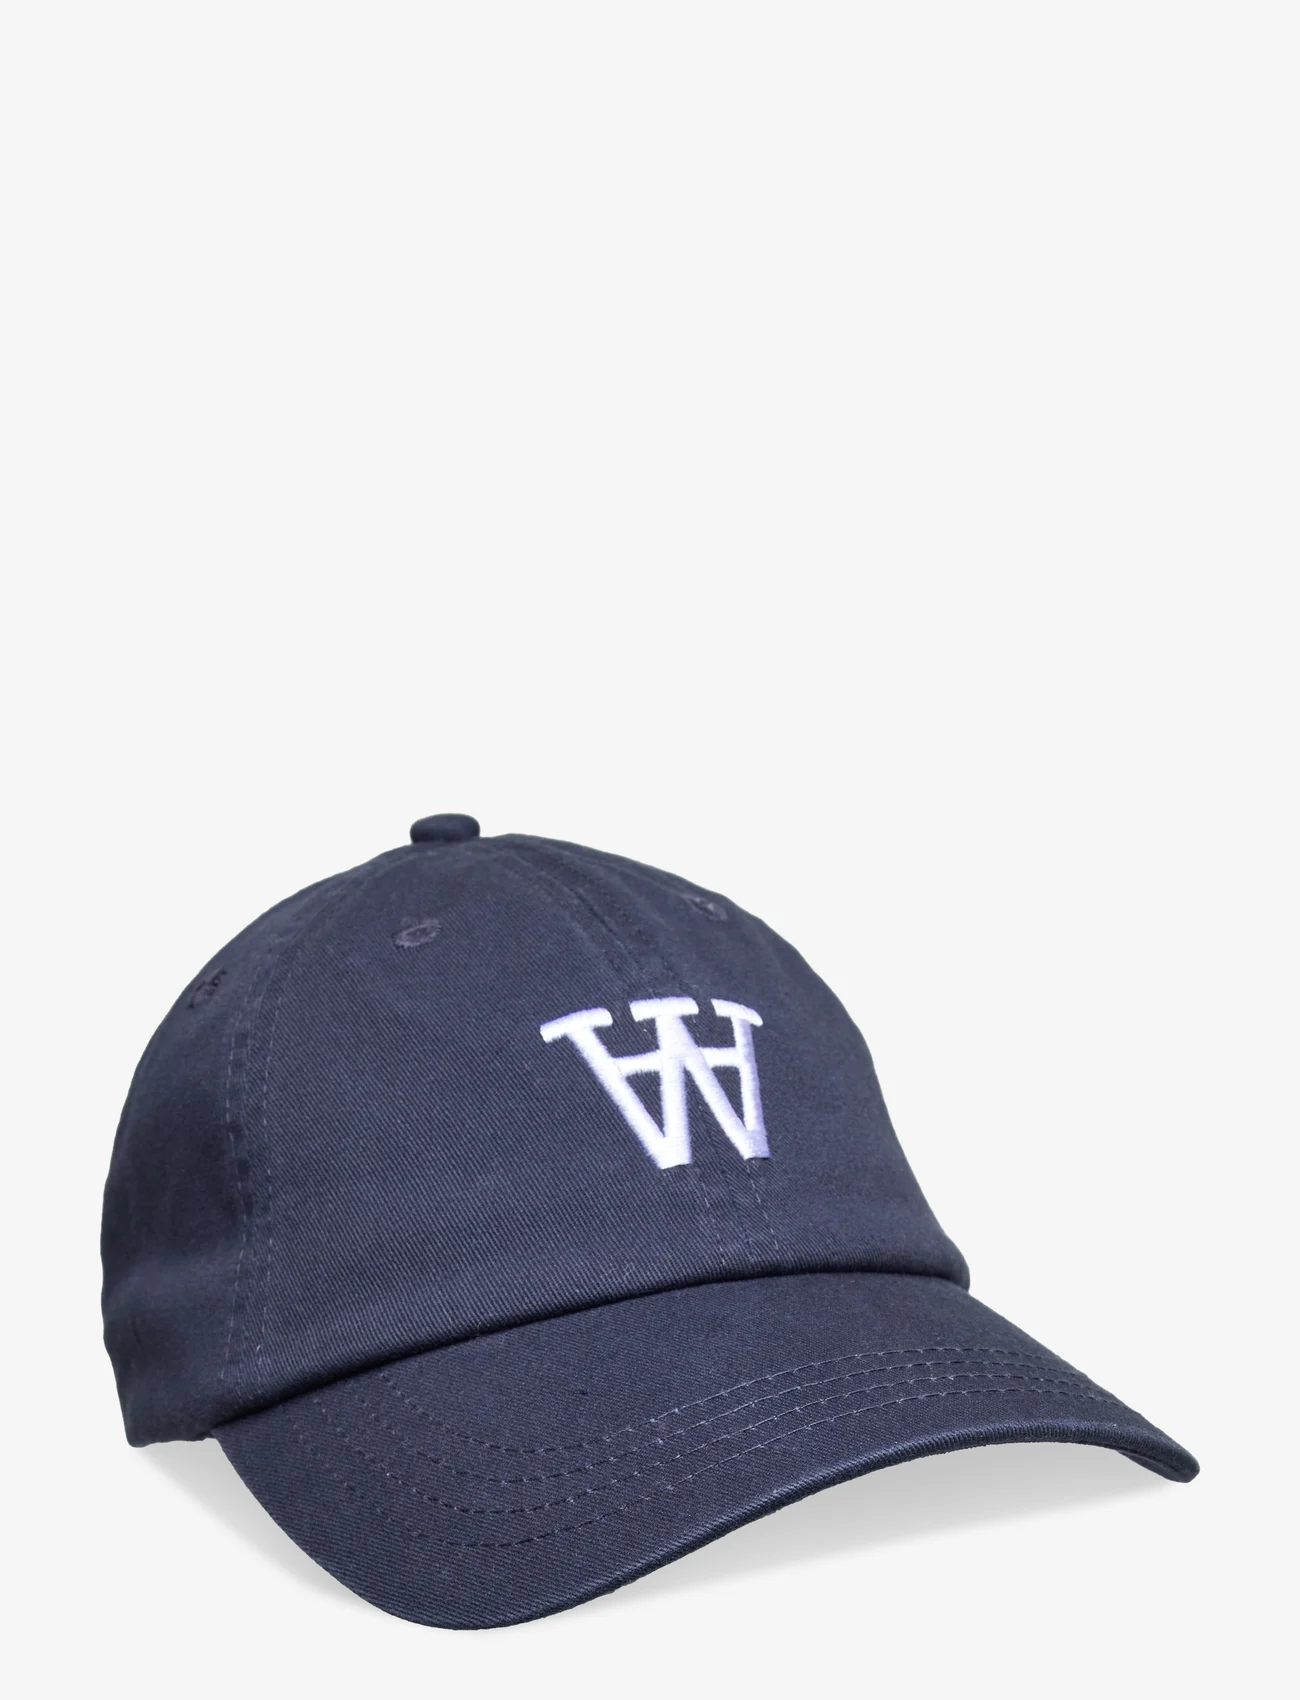 Double A by Wood Wood - Eli AA cap - laveste priser - navy - 0